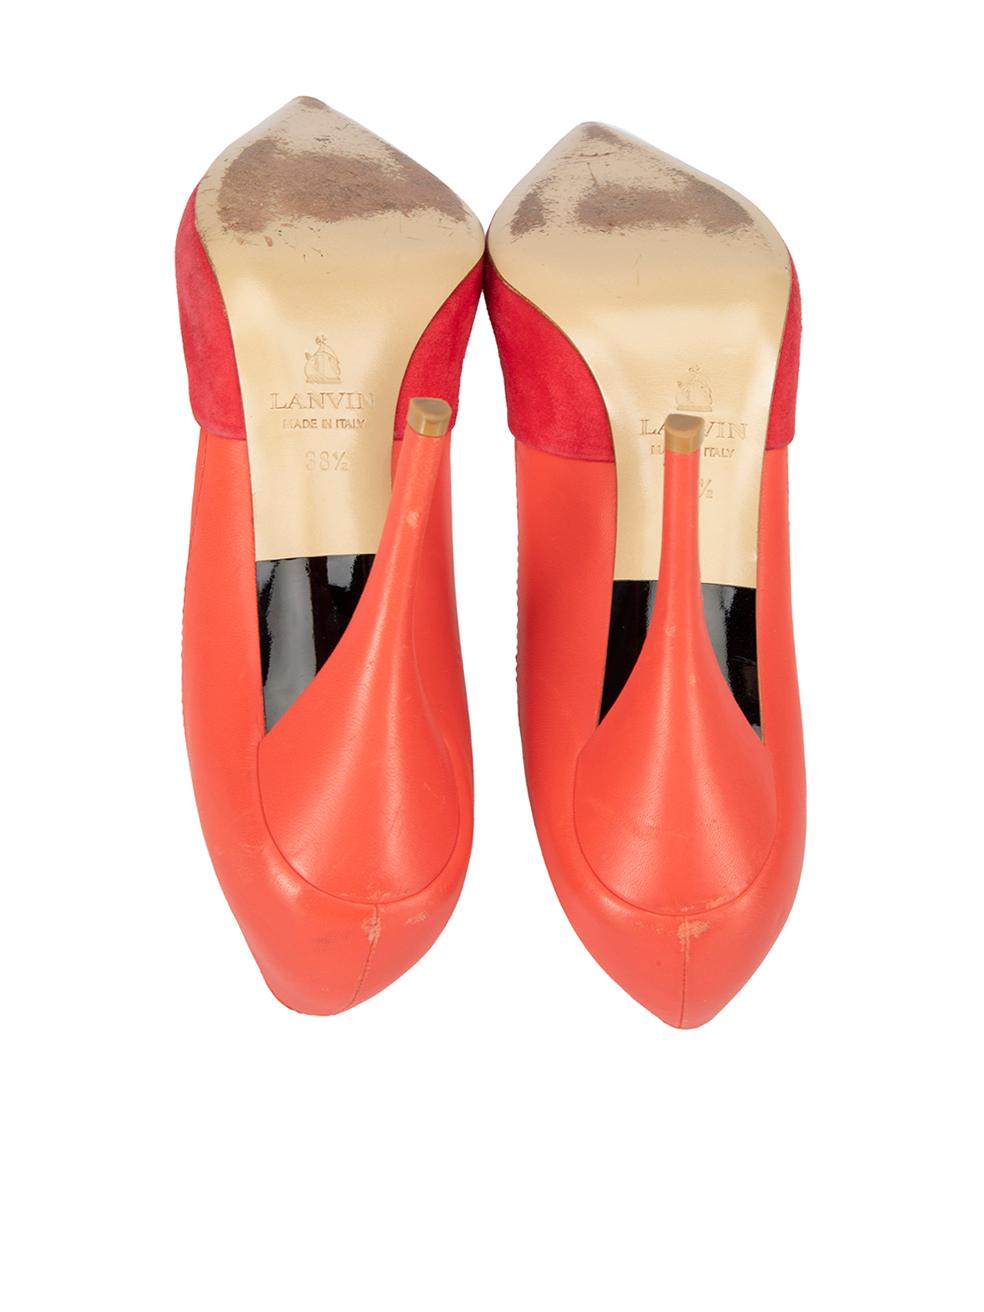 Lanvin Women's Red Suede & Leather Panel Pointed Toe Pumps For Sale 3